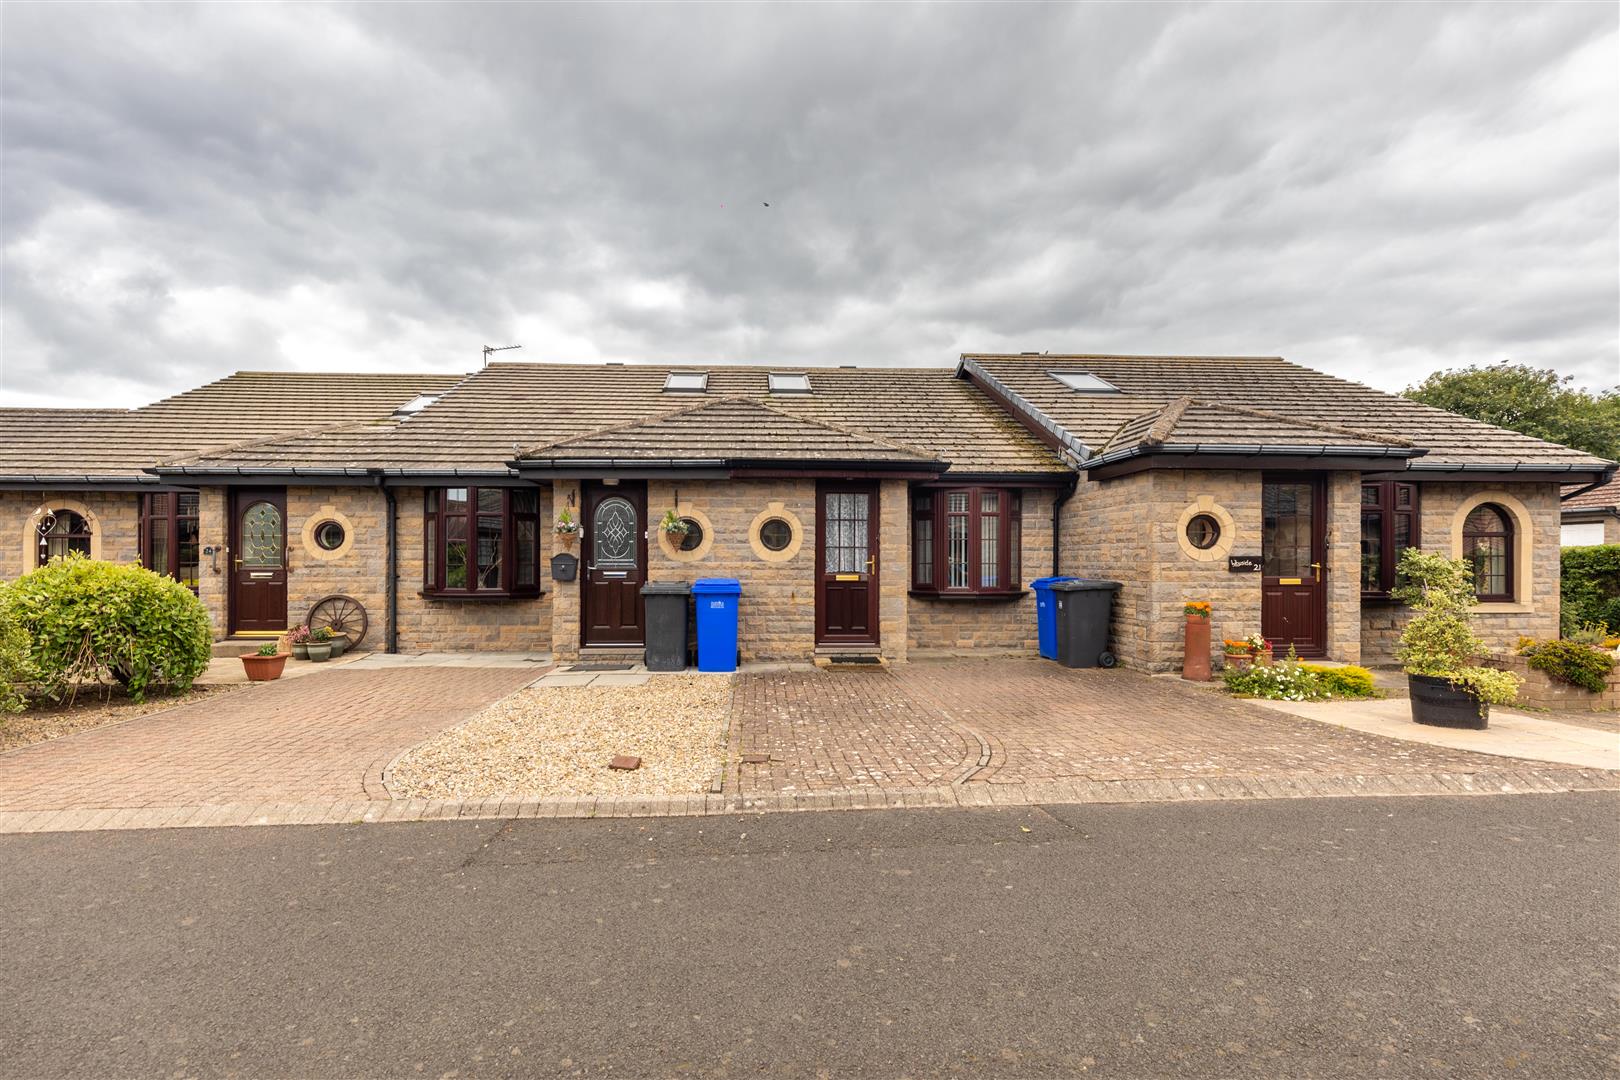 2 bed  for sale in Harcar Court, Seahouses - Property Image 1